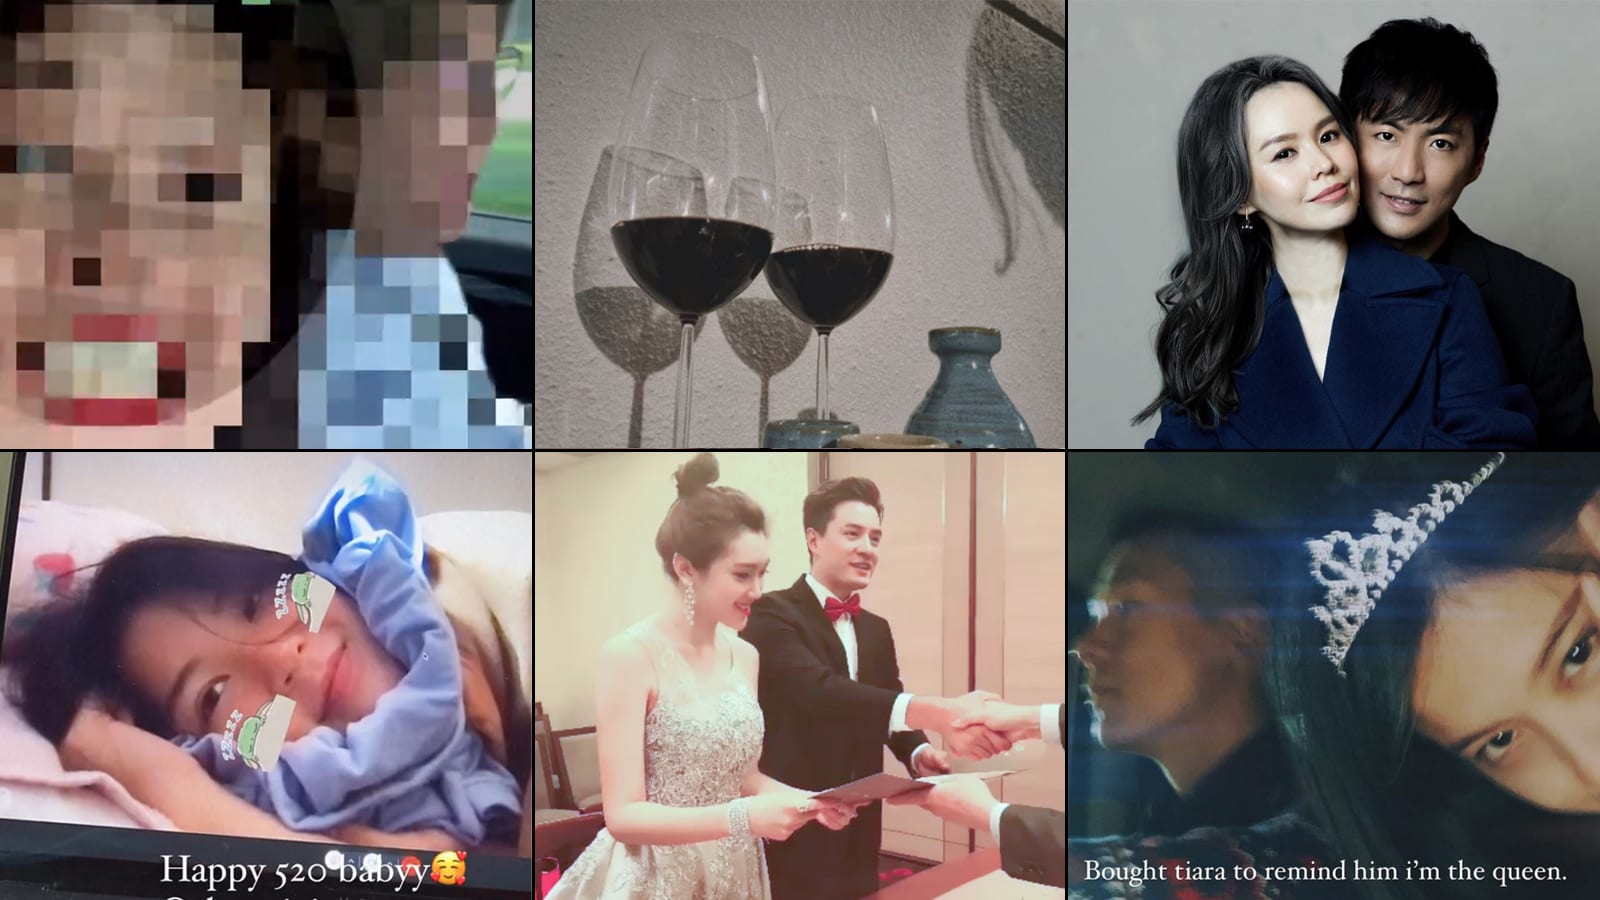 Desmond Tan’s Boozy Message To A Special Someone & 9 Other Sweet 520 Day Posts From Local Celebs